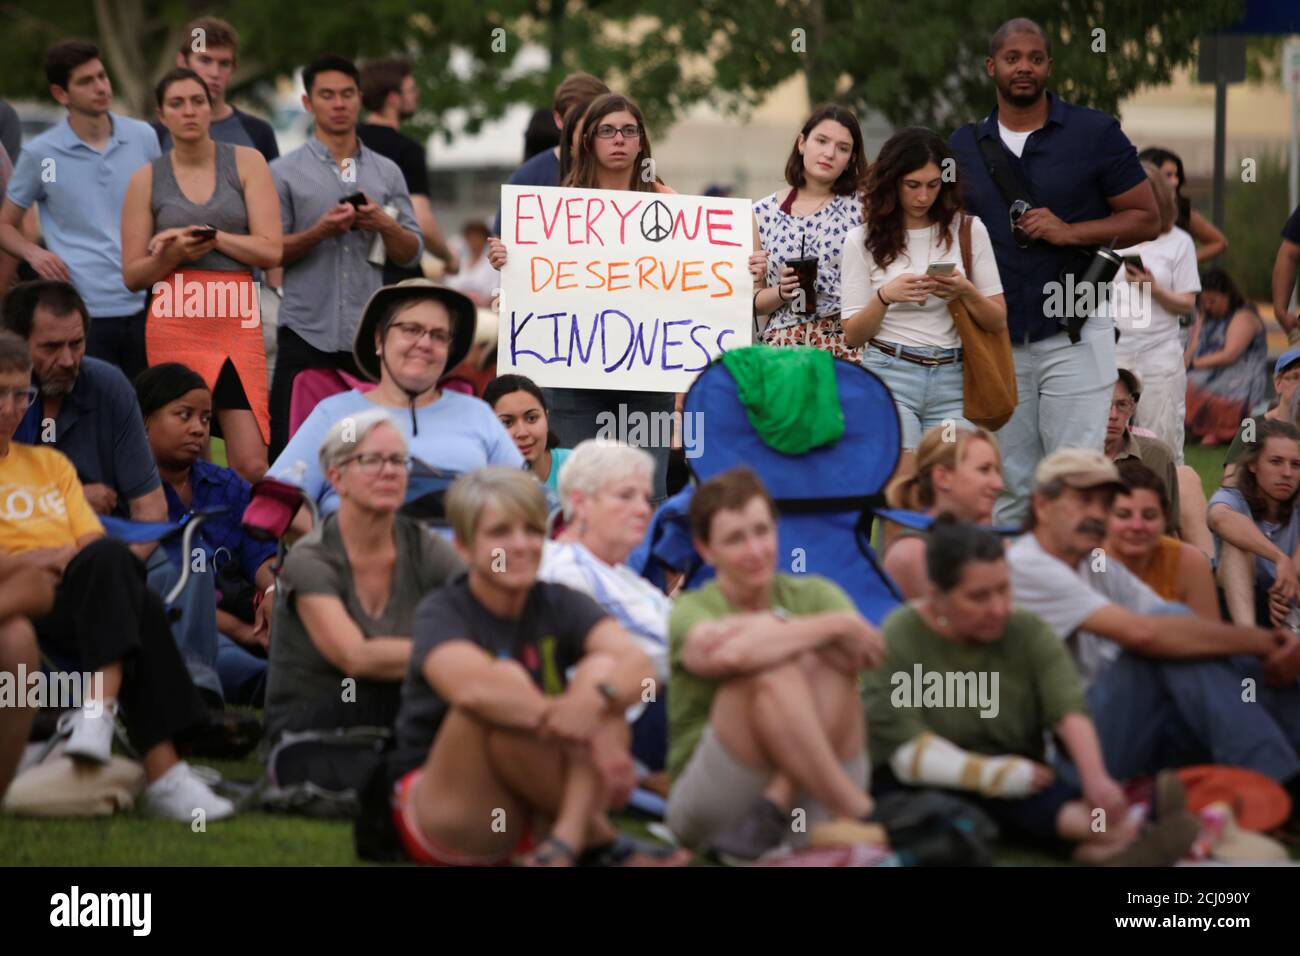 People sit and hold signs during an immigration rights rally at Cleveland Square Park in El Paso, Texas, U.S. July 12, 2019. REUTERS/Daniel Becerril Stock Photo